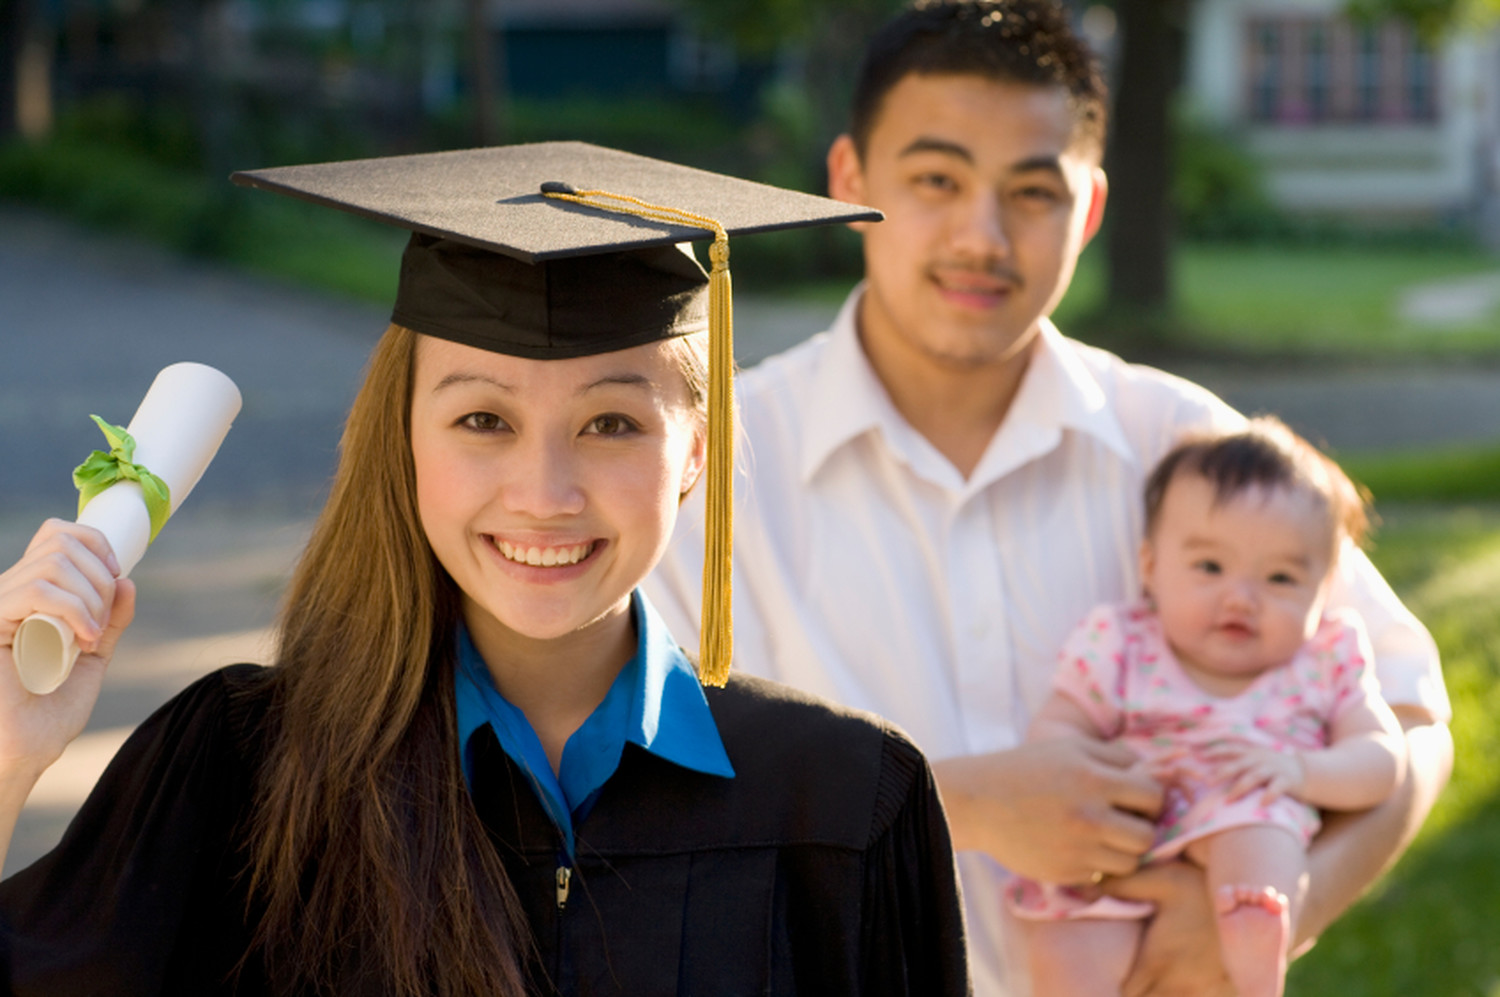 Child Care Means Parents in School Program Supports Community College Students with Dependent Children